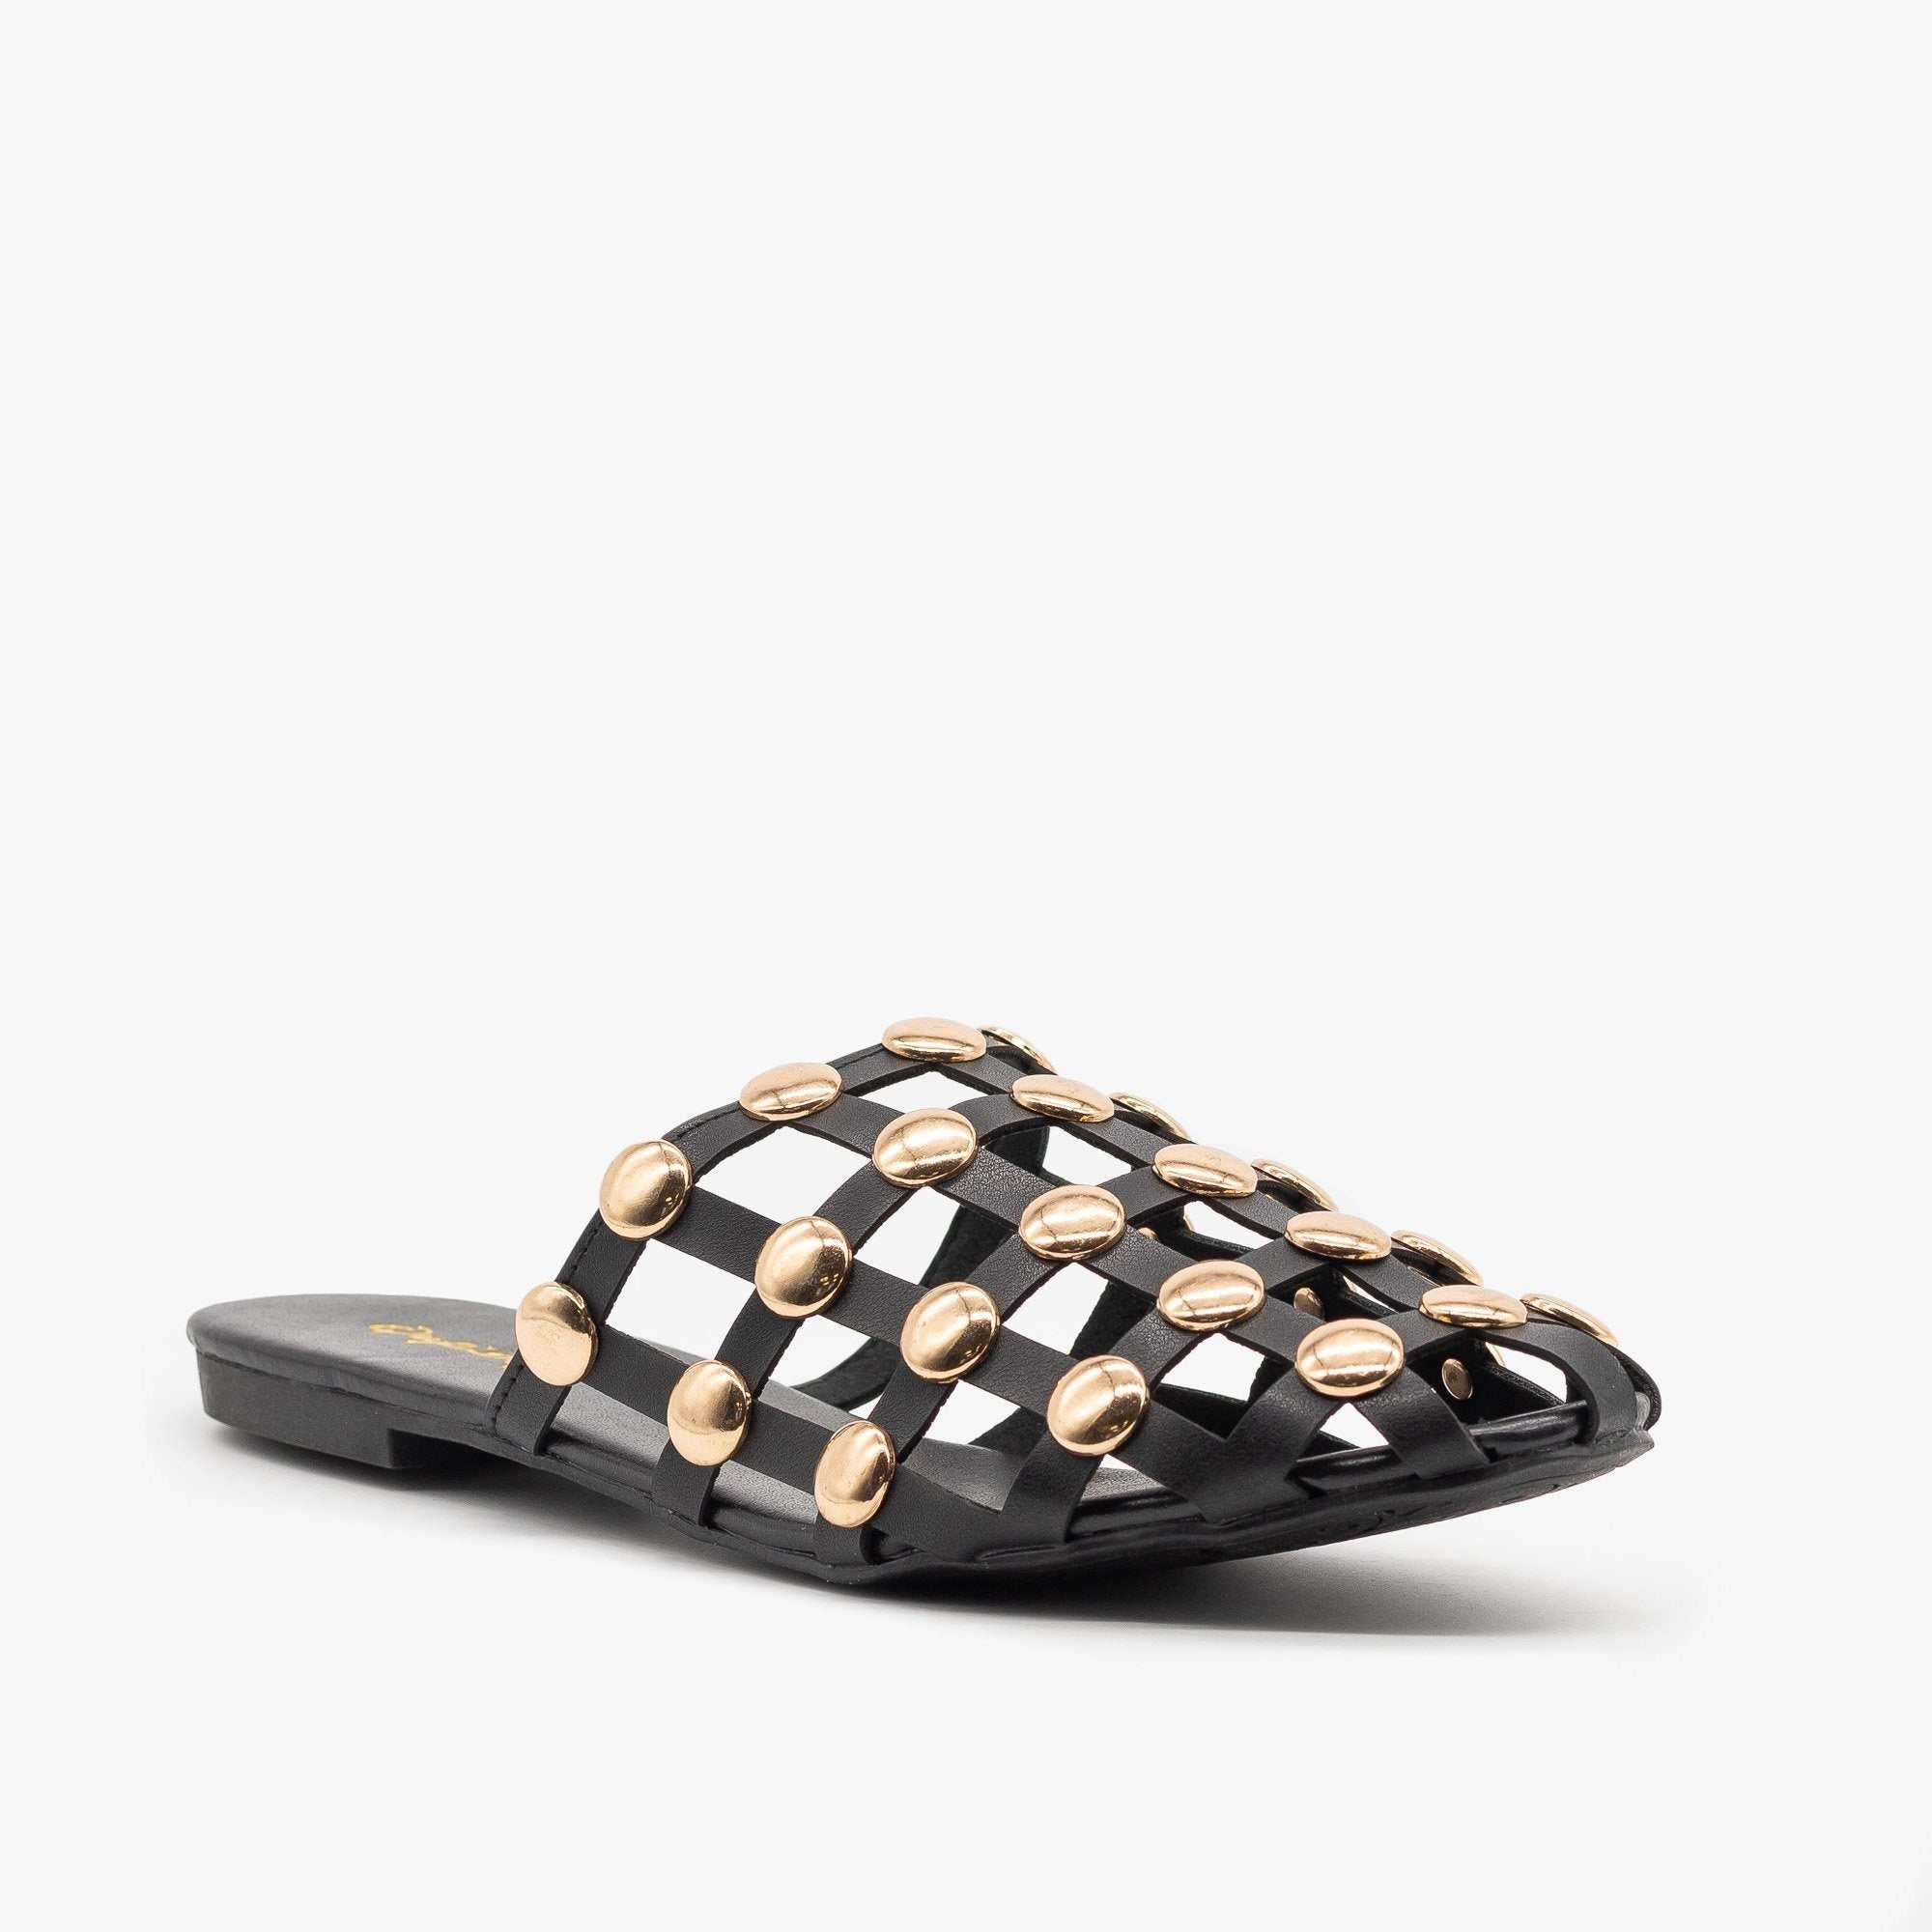 Woven Studded Mules - Qupid Shoes 